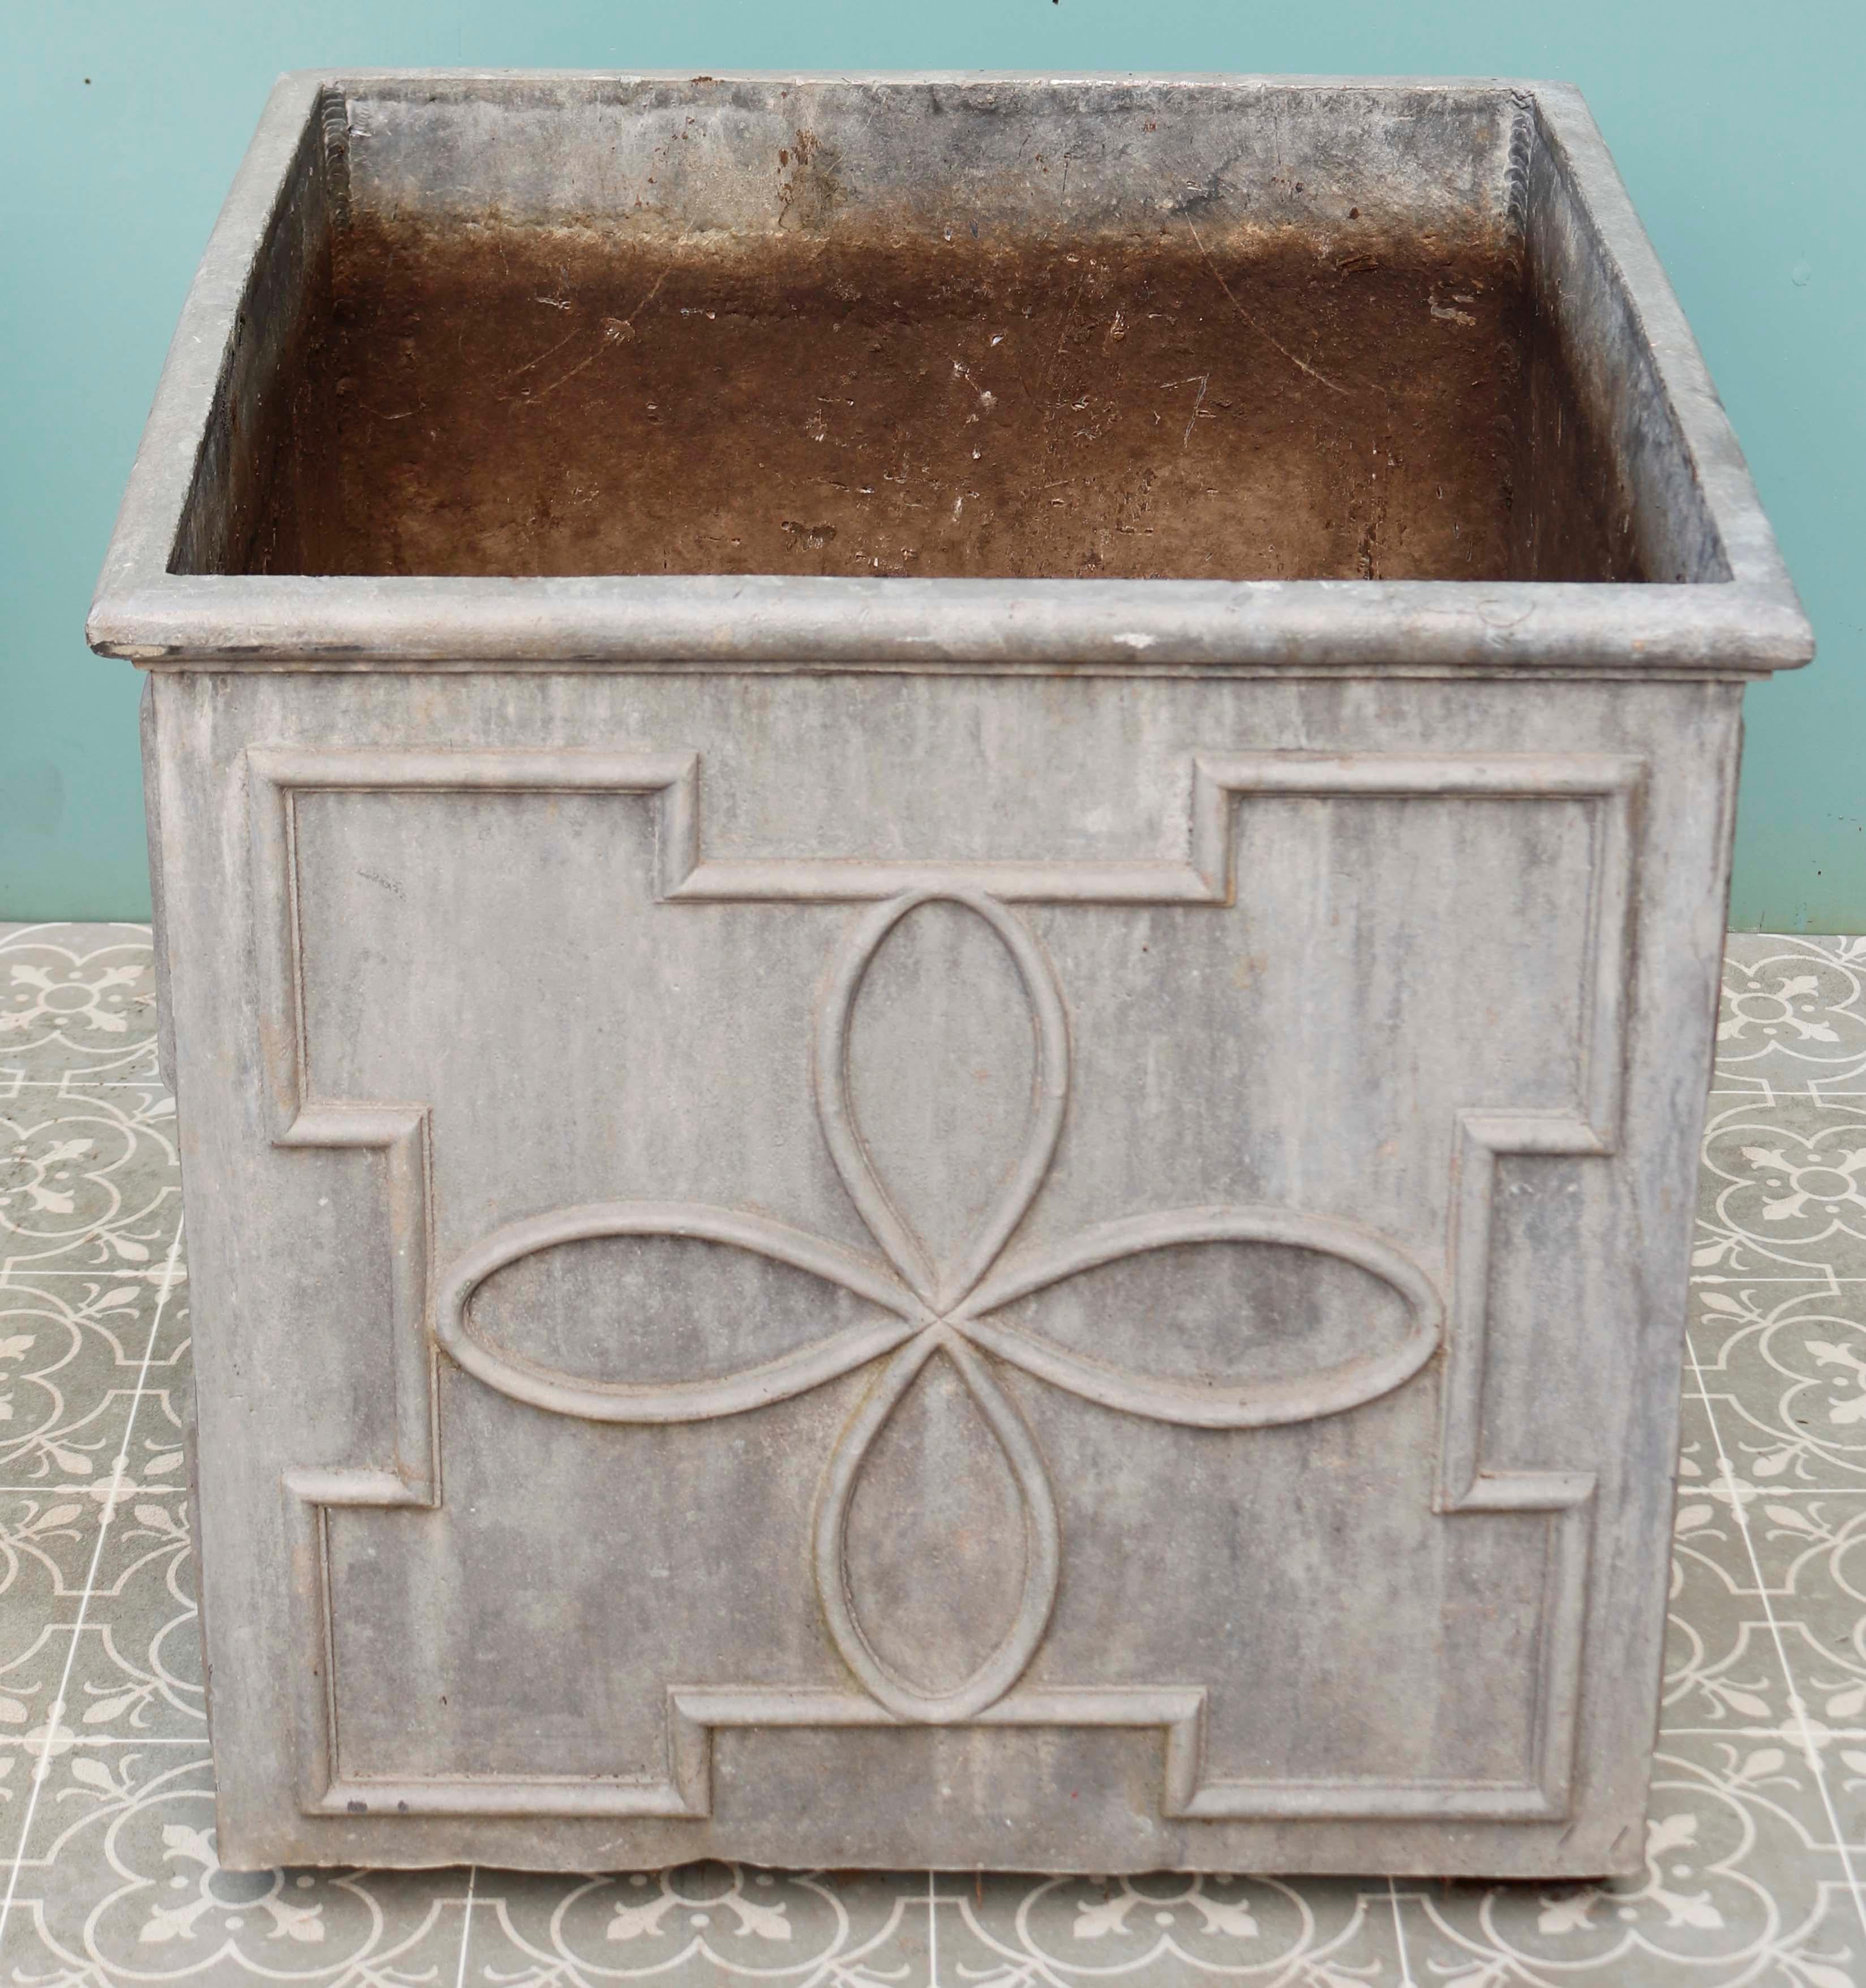 Pair of large lead garden planters. Two vintage lead planters with finely worked floral patterns. Both include drainage holes for plants making them practical as well as visually appealing. The last image shows the planters in situ at Abbey House